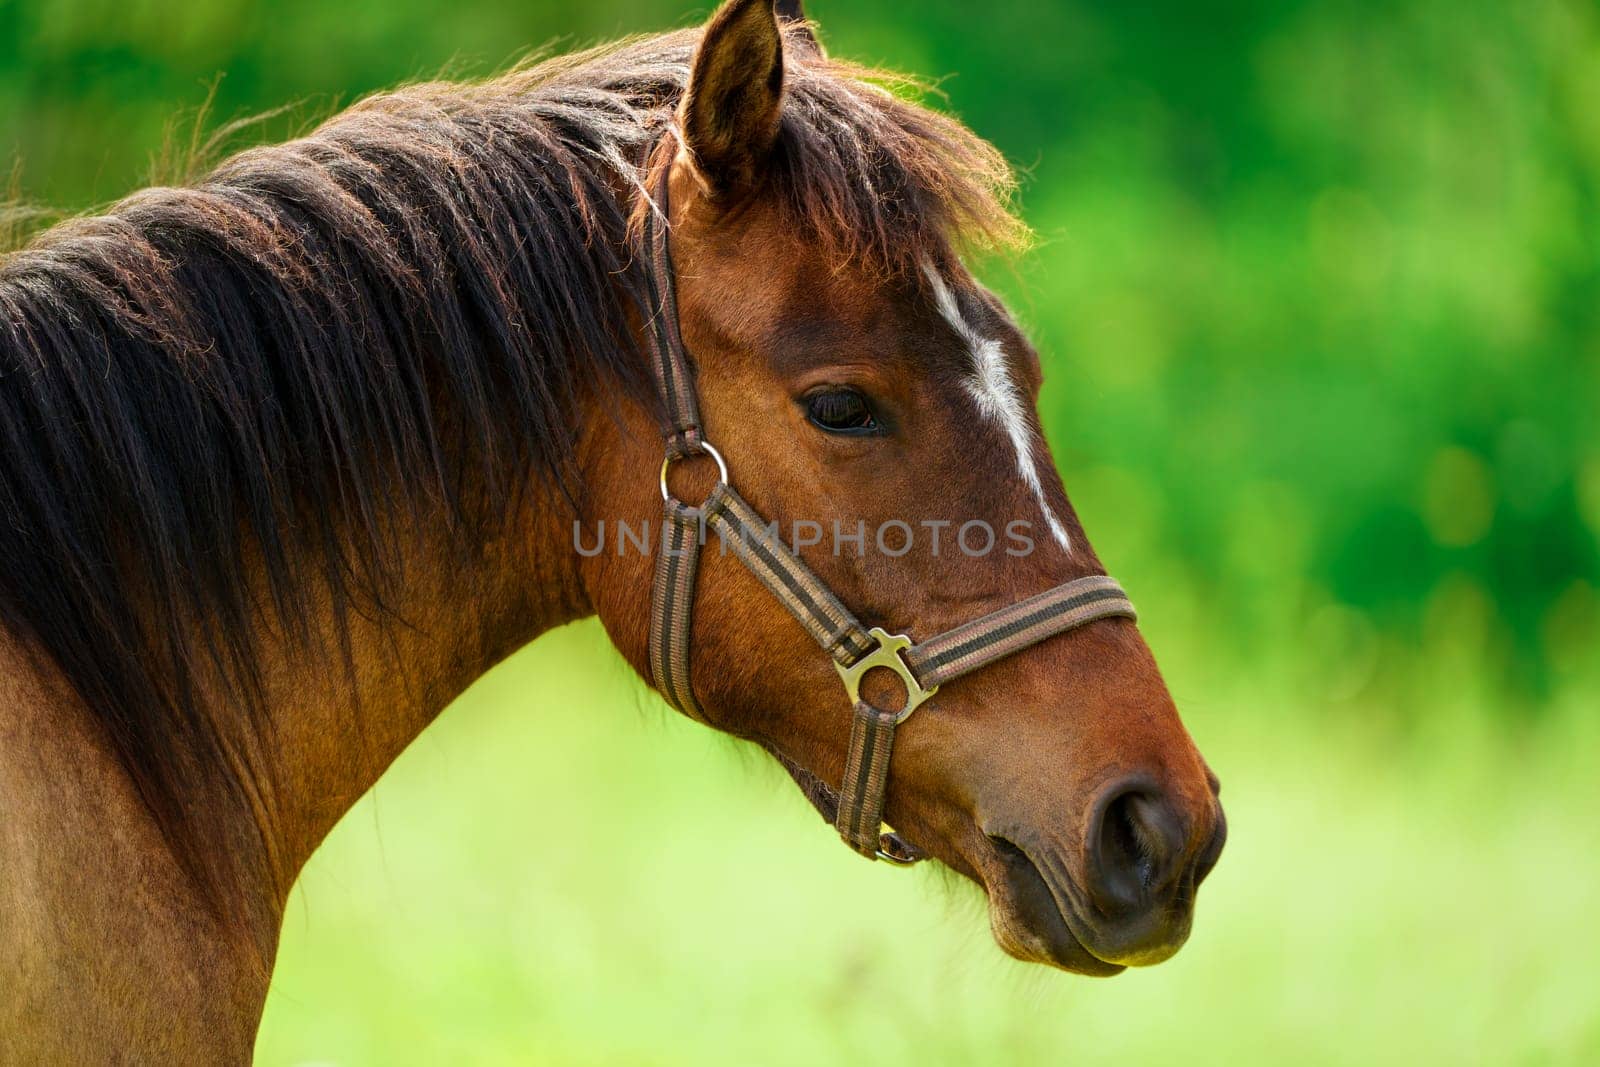 Powerful and elegant, a brown horse against a vibrant green field, creating a tranquil and captivating scene. Capturing the essence of grace and power, this close-up portrait features a stunning brown horse. horse close up face